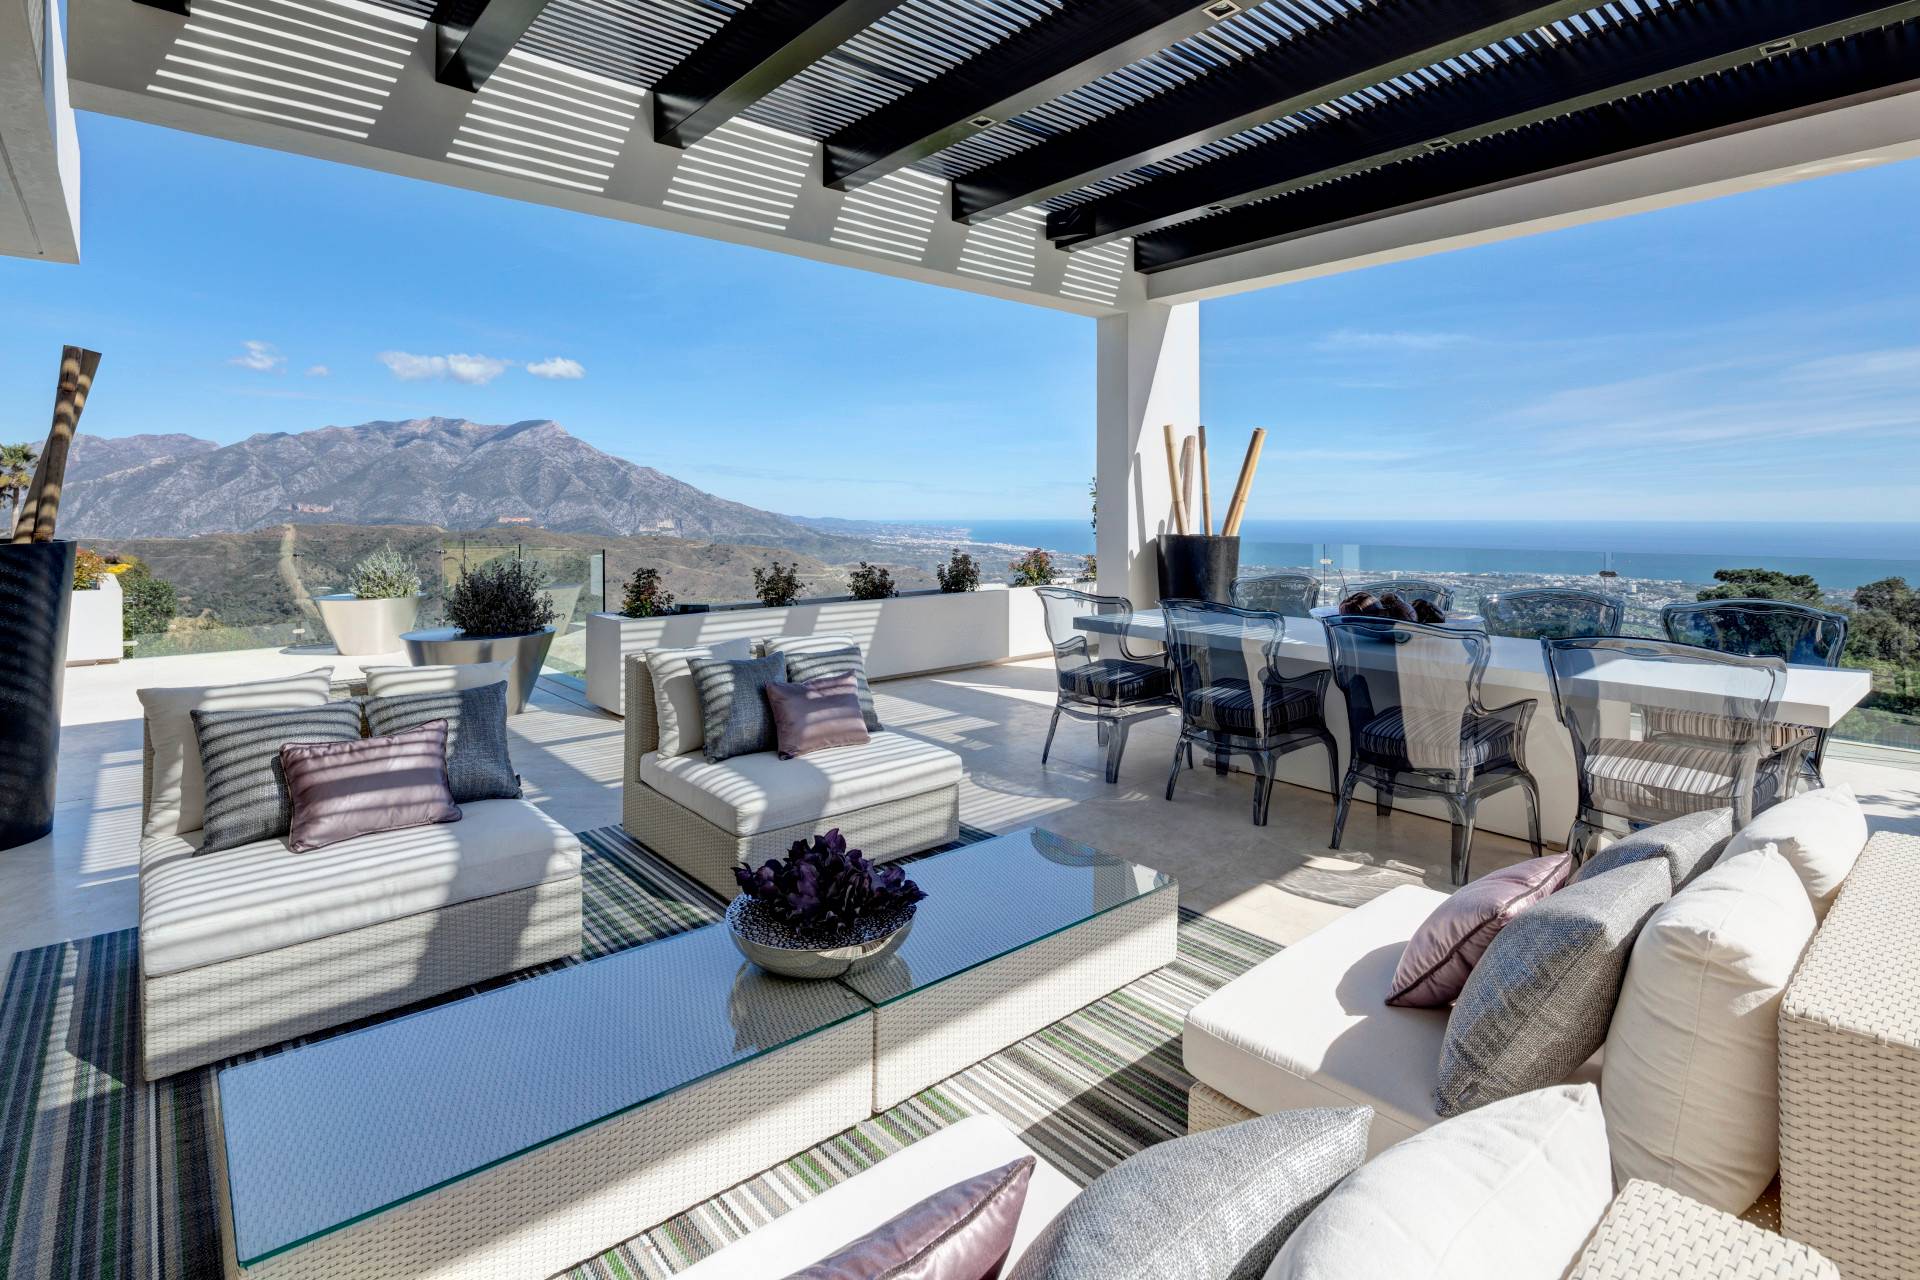 This luxury villa with infinity swimming pool and fantastic panoramic views towards the sea and mountains is located in the protected natural area of La Zagaleta Country Club, one of ...